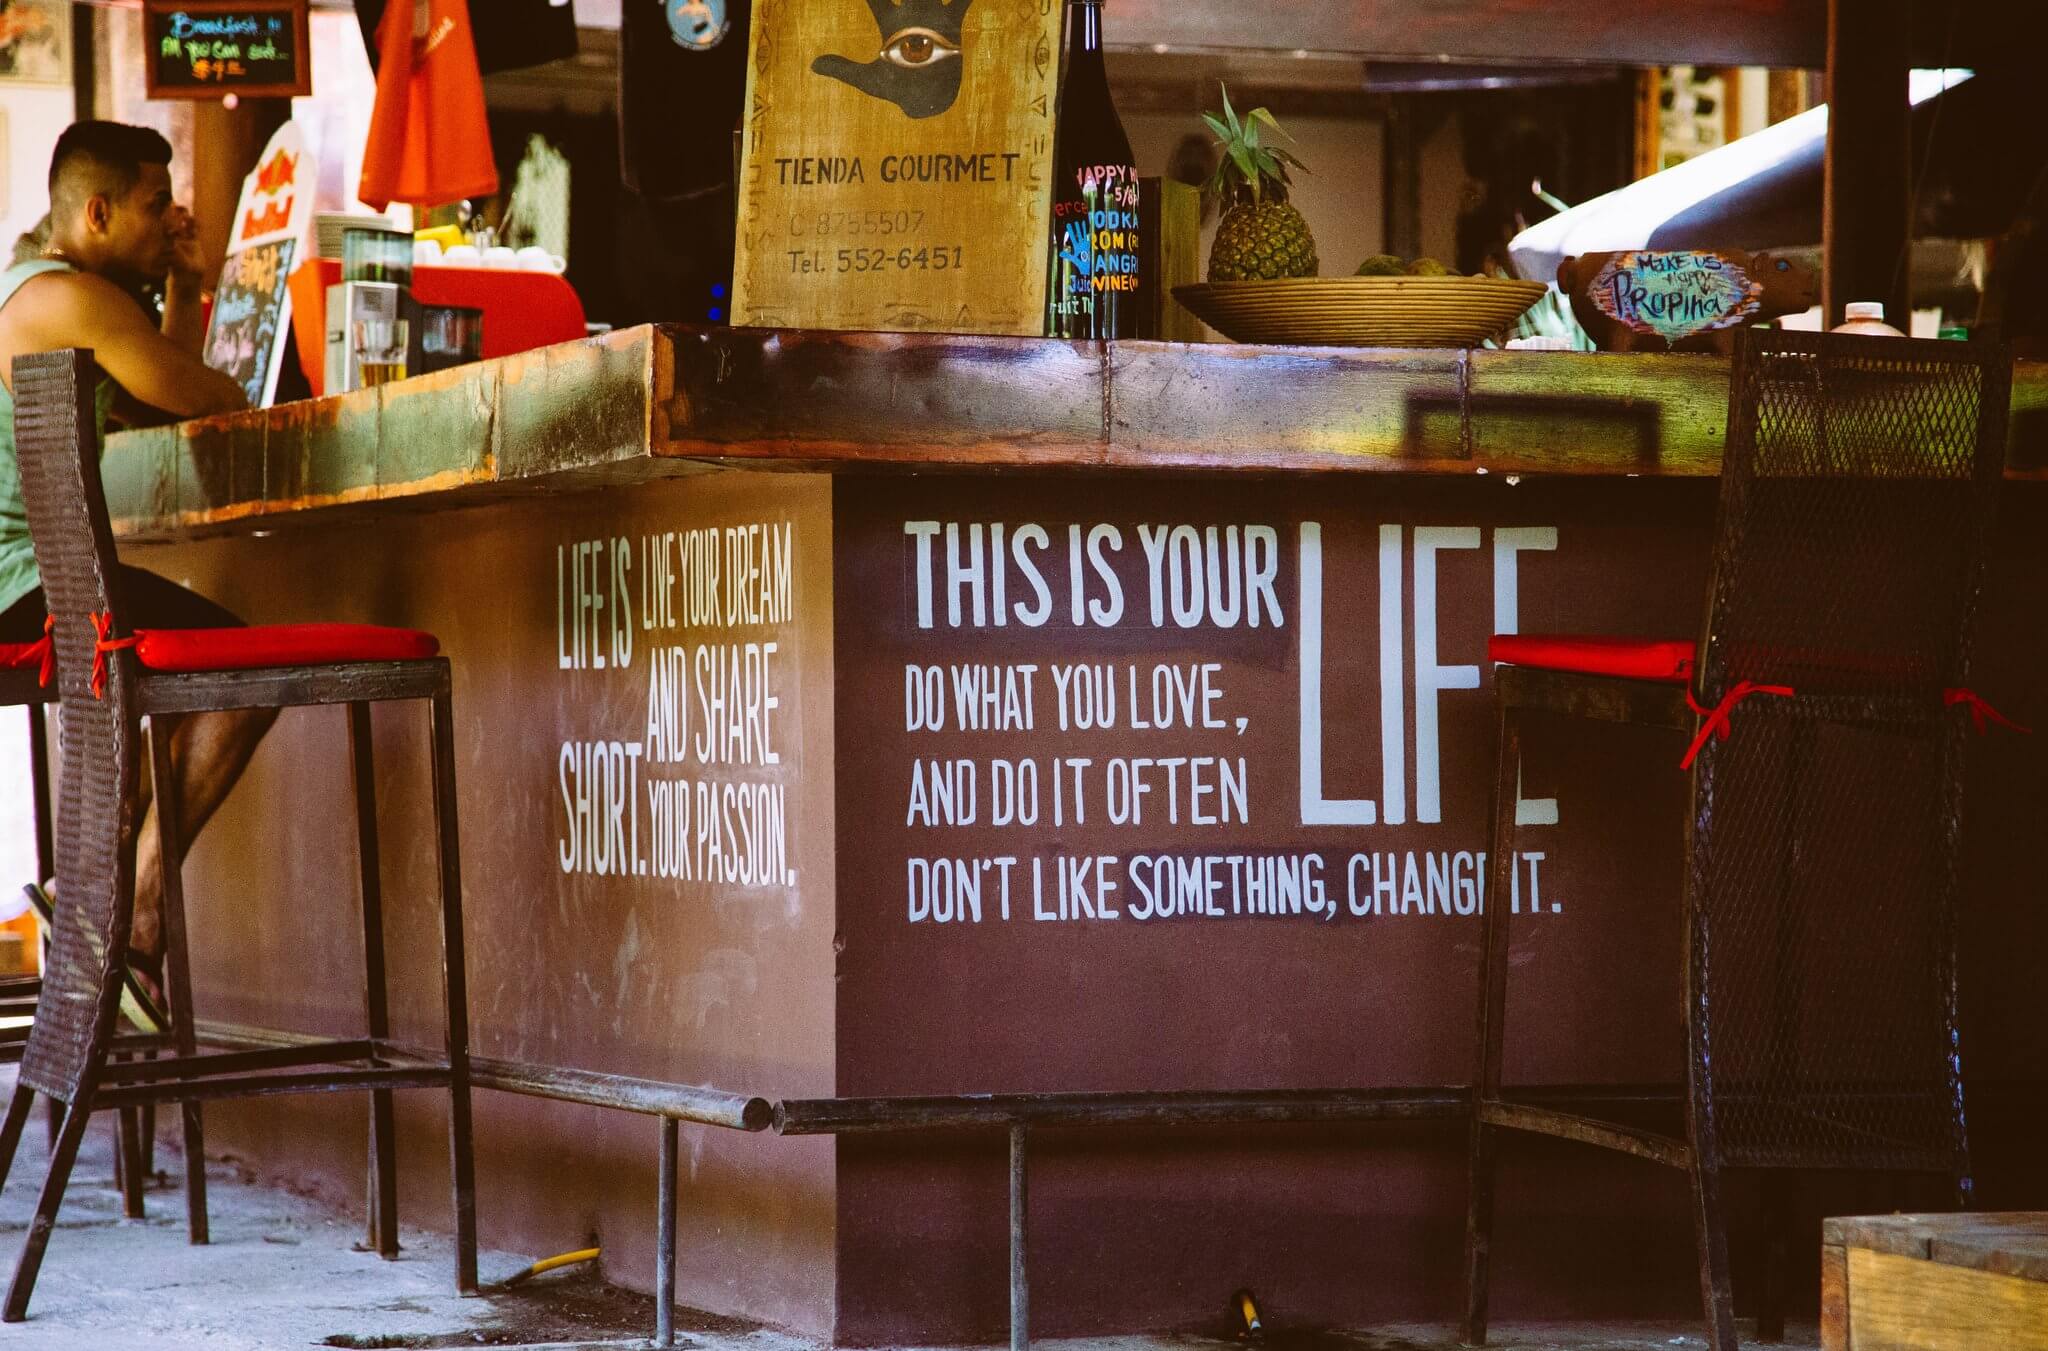 Words of wisdom and other bar art in Granada, Nicaragua